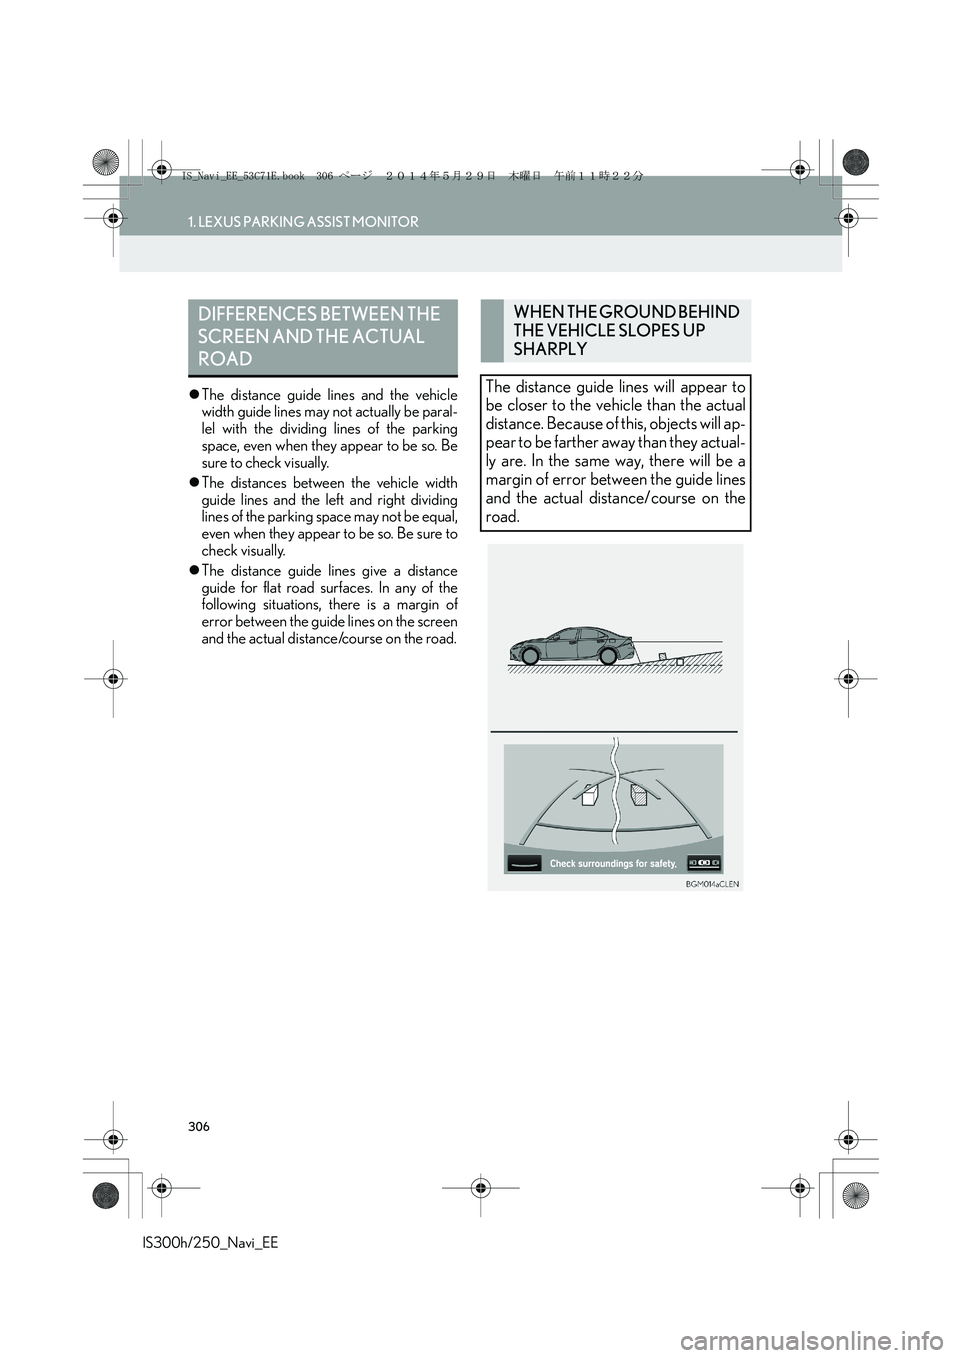 Lexus IS300h 2014  Navigation manual 306
1. LEXUS PARKING ASSIST MONITOR
IS300h/250_Navi_EE
�zThe distance guide lines and the vehicle
width guide lines may not actually be paral-
lel with the dividing lines of the parking
space, even wh